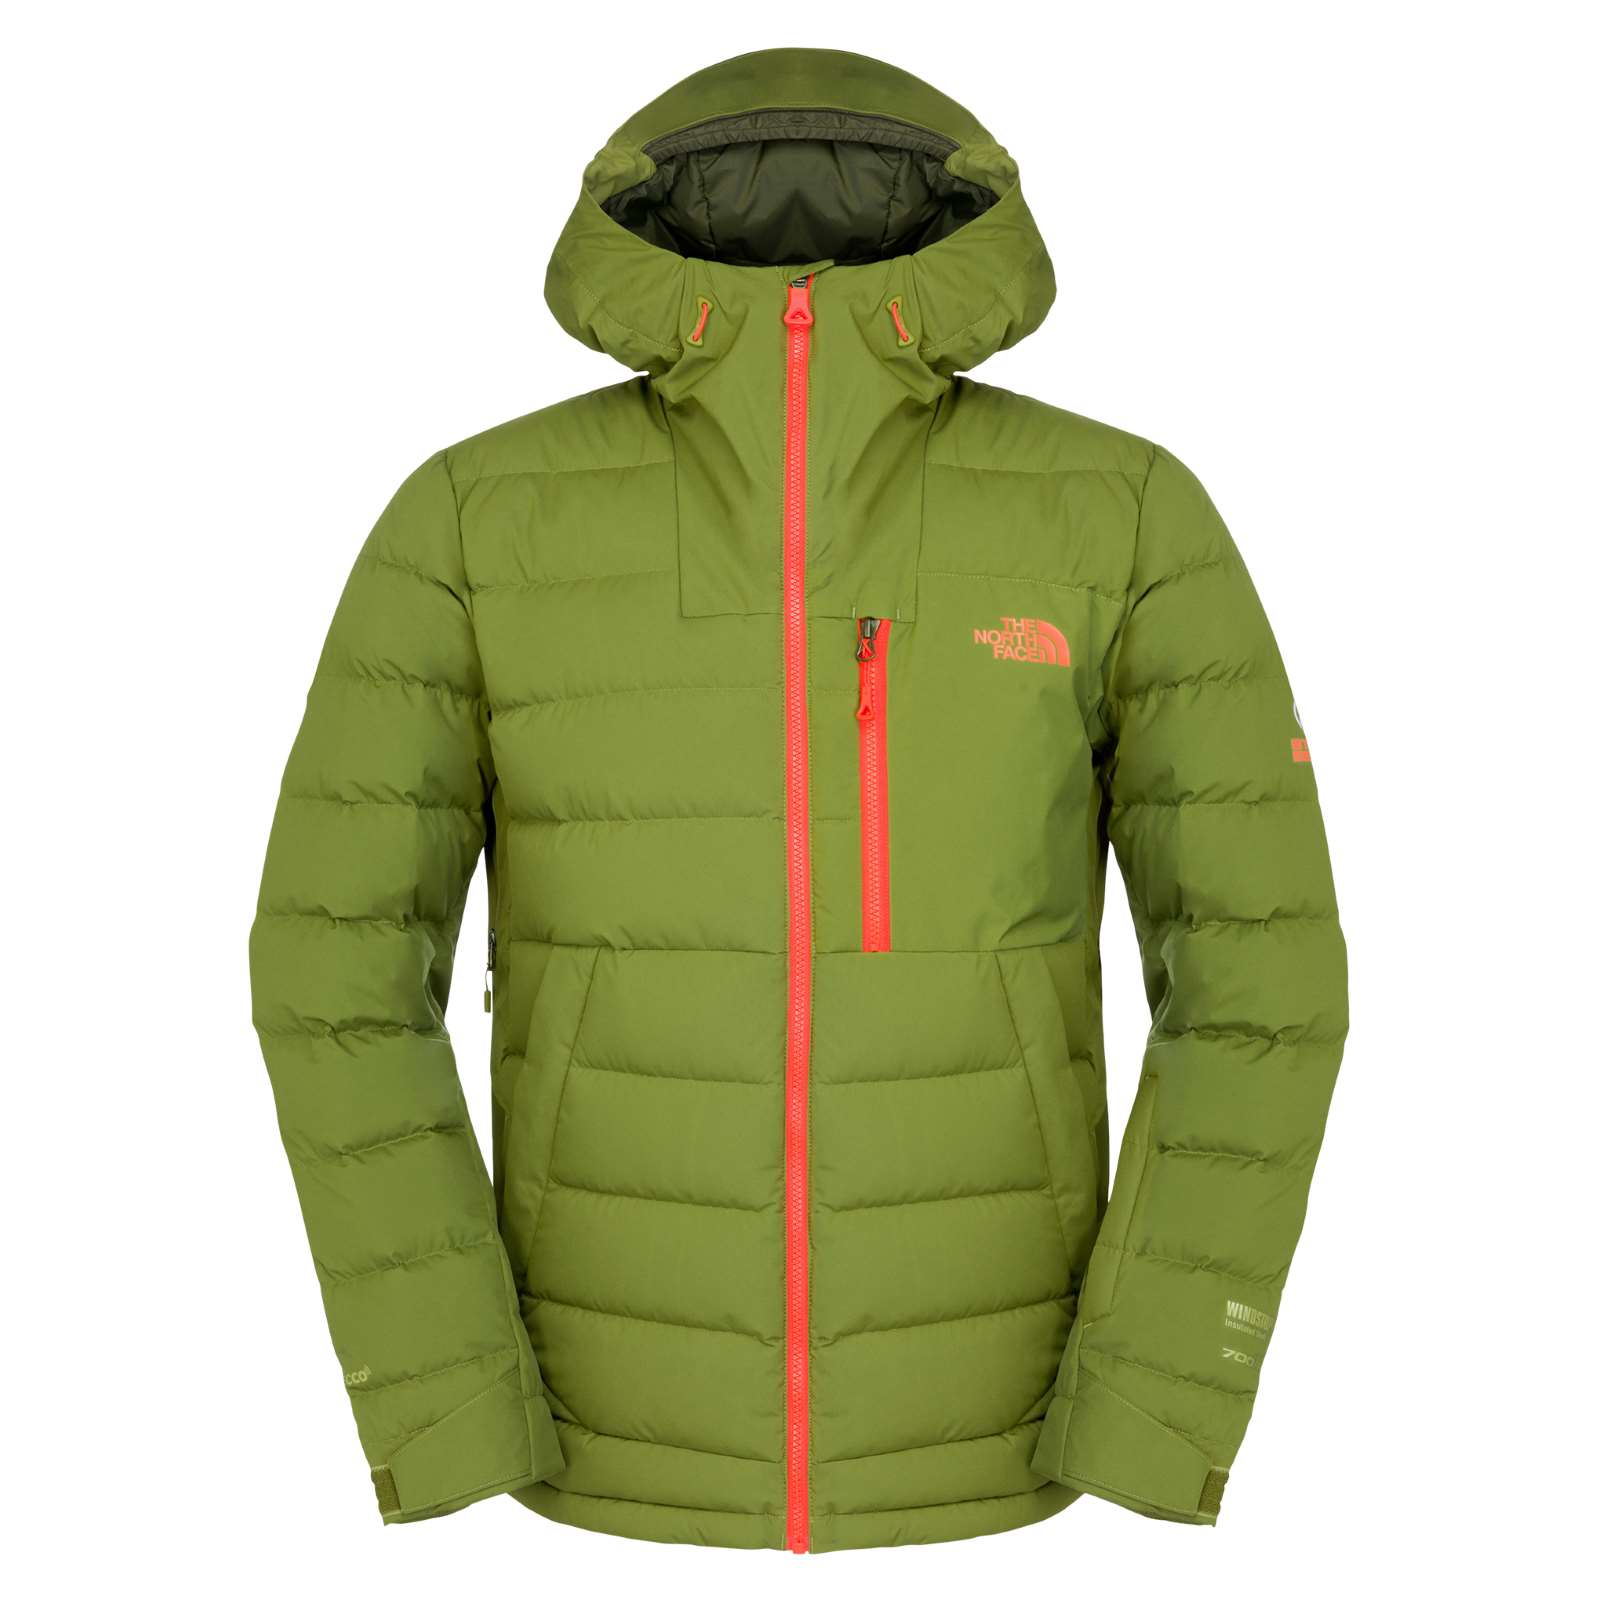 Hybrid Jacket from Outnorth